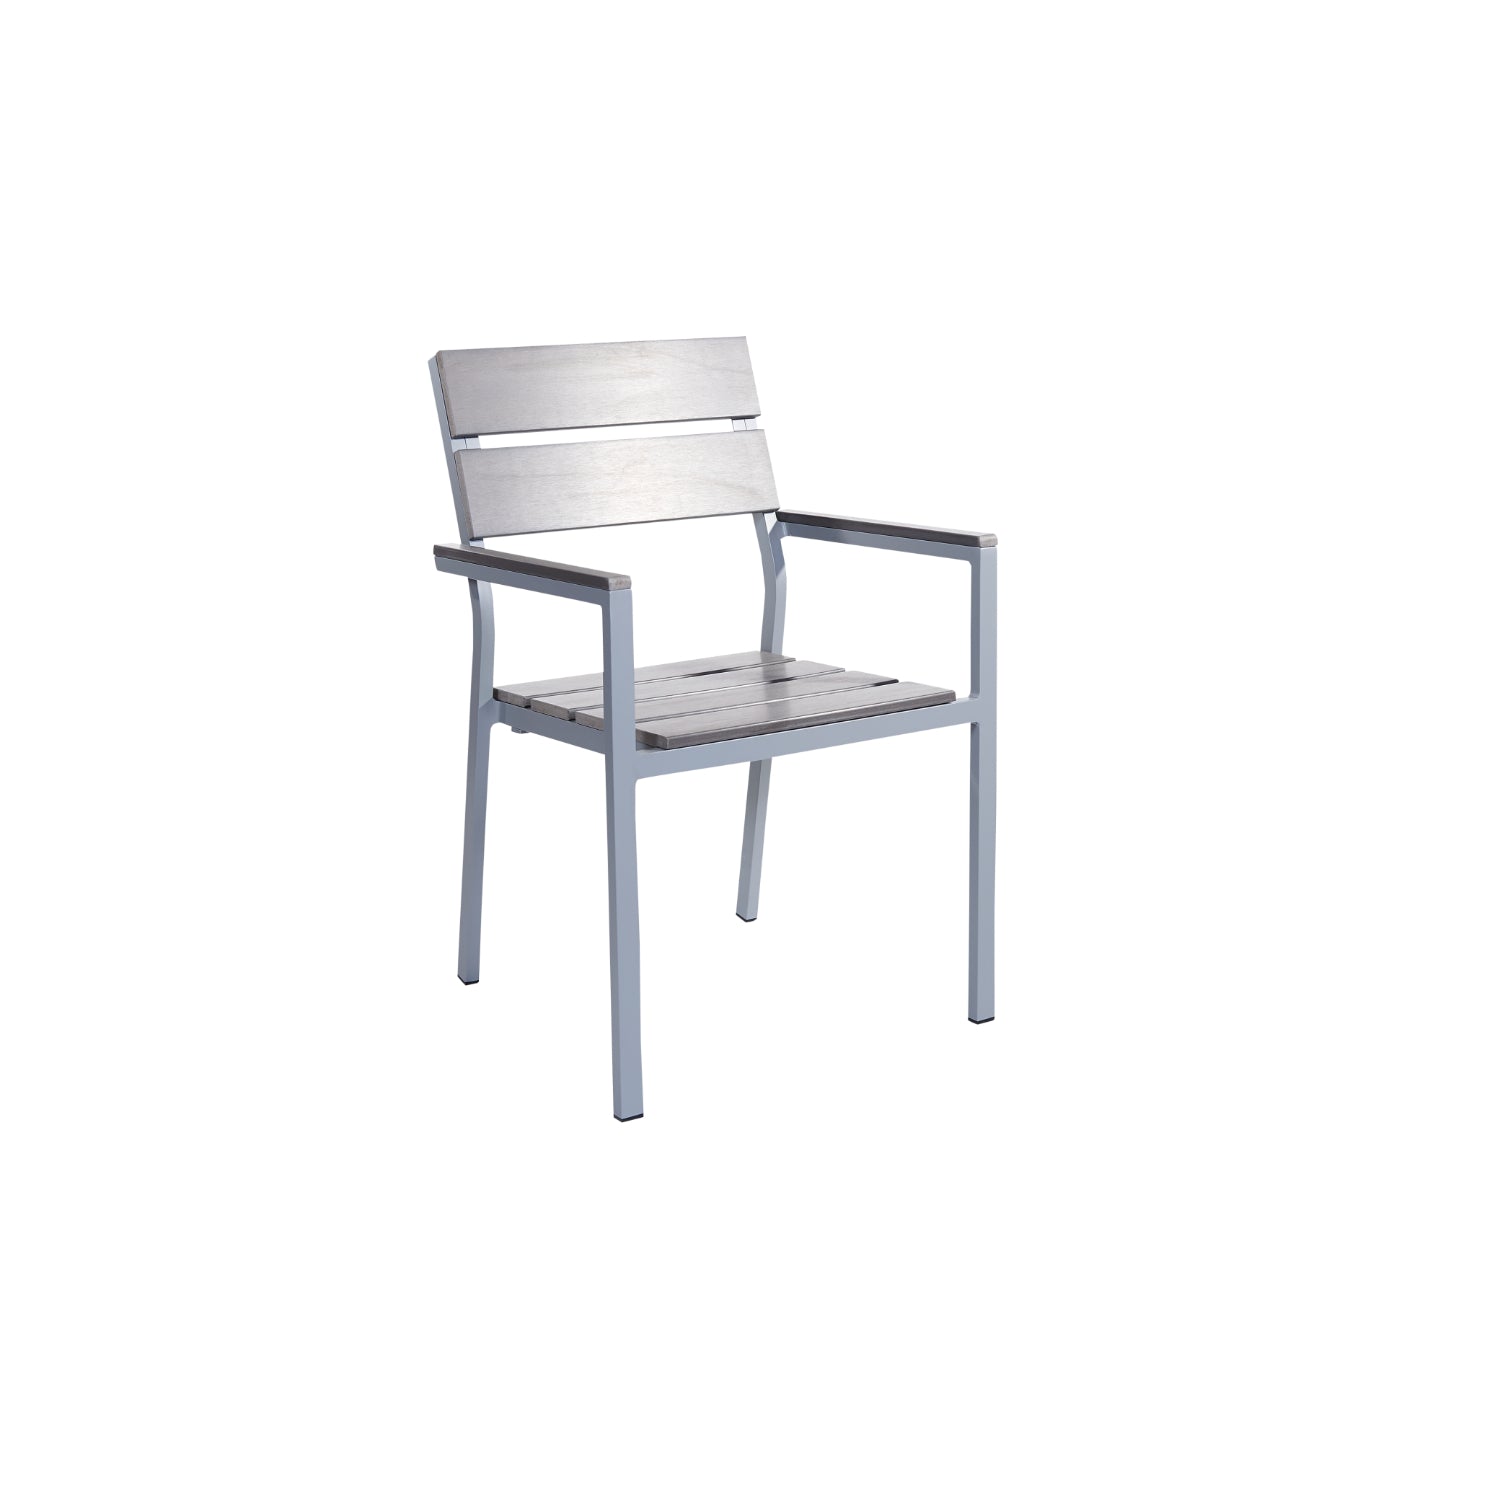 Seaside Collection Outdoor/Indoor Stacking Aluminum Armchair with Gray Synthetic Teak Seat and Back